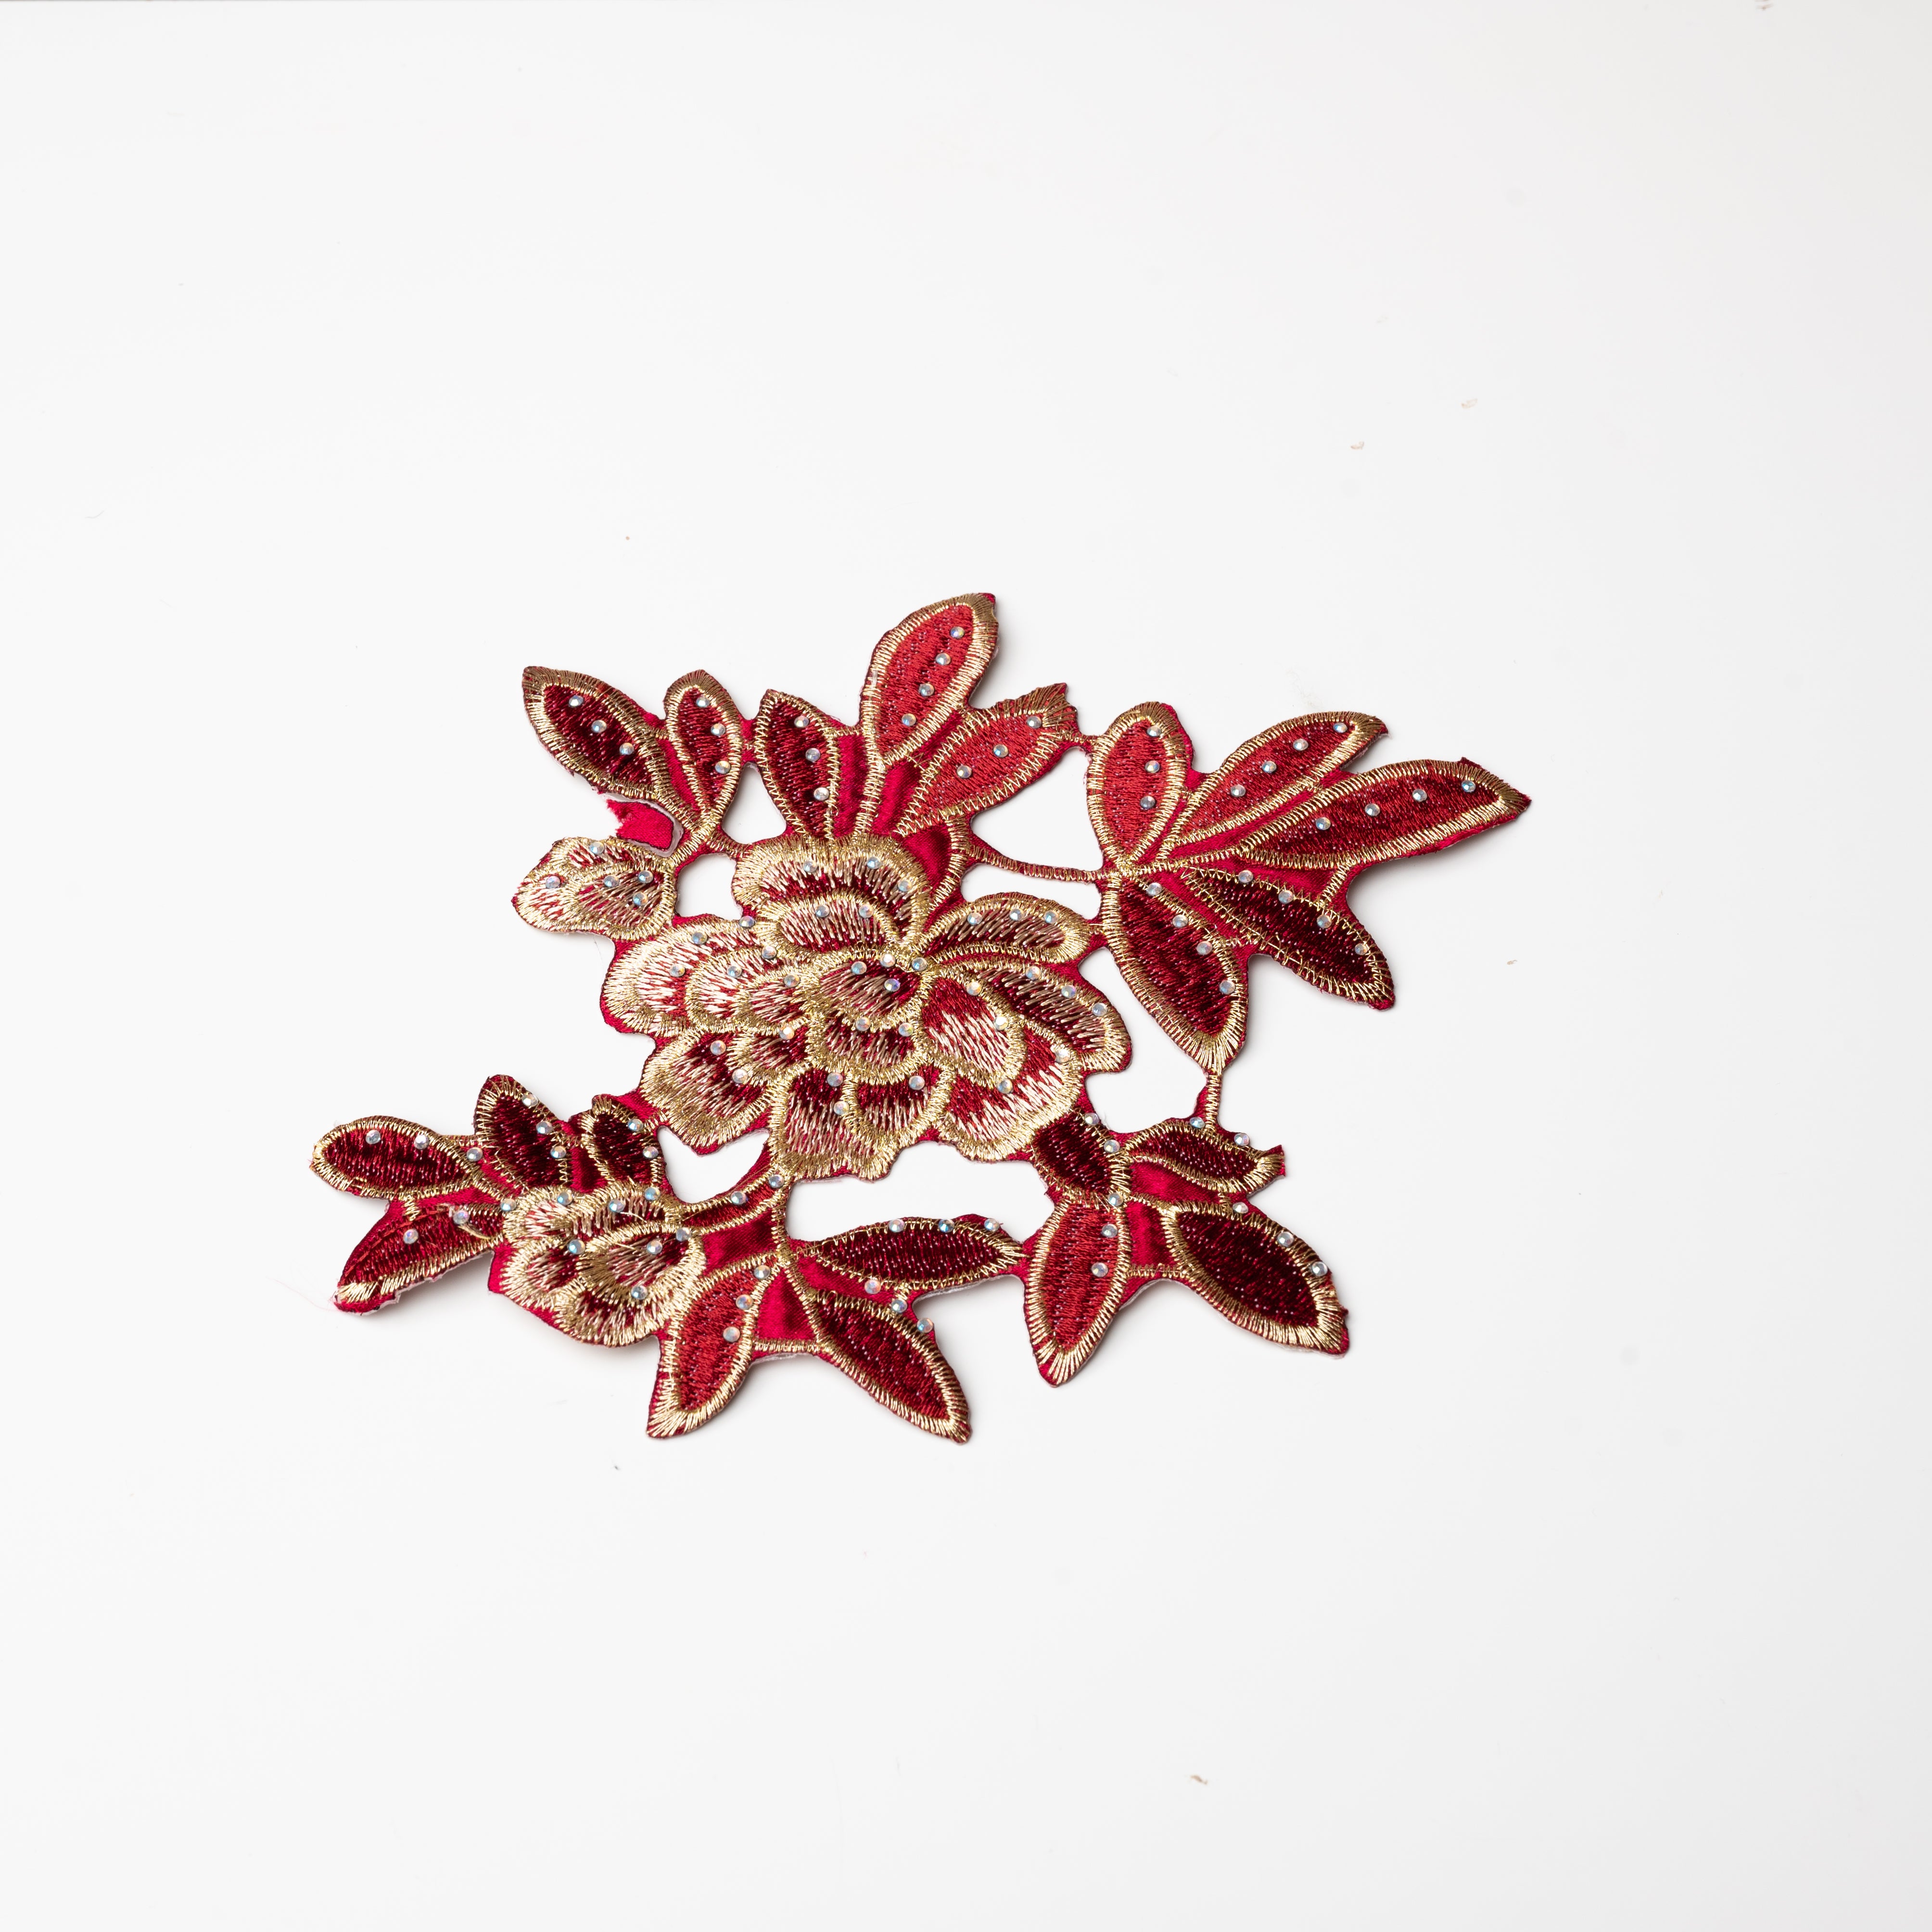 Heavily embroidered burgundy and gold floral iron on applique scattered with hot fix AB crystals.  The petals and leaves are predominantly burgundy and are outlined with gold thread.